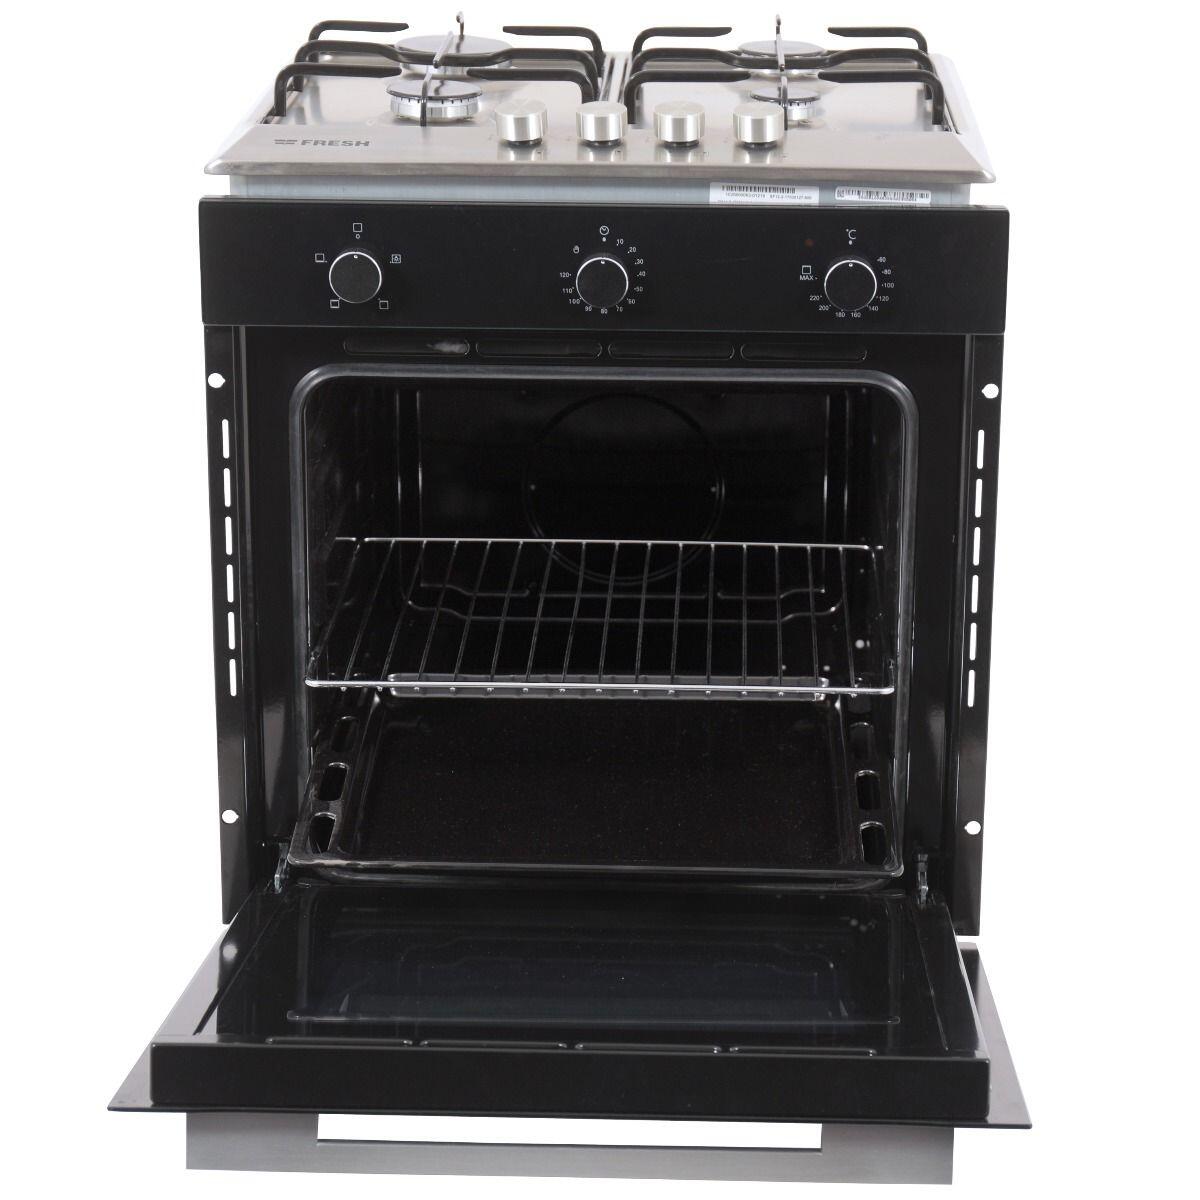 Fresh Set Of Built-In Gas Hob, 4 Burners and Electric Oven With Grill - Built-in Hobs - Built-in